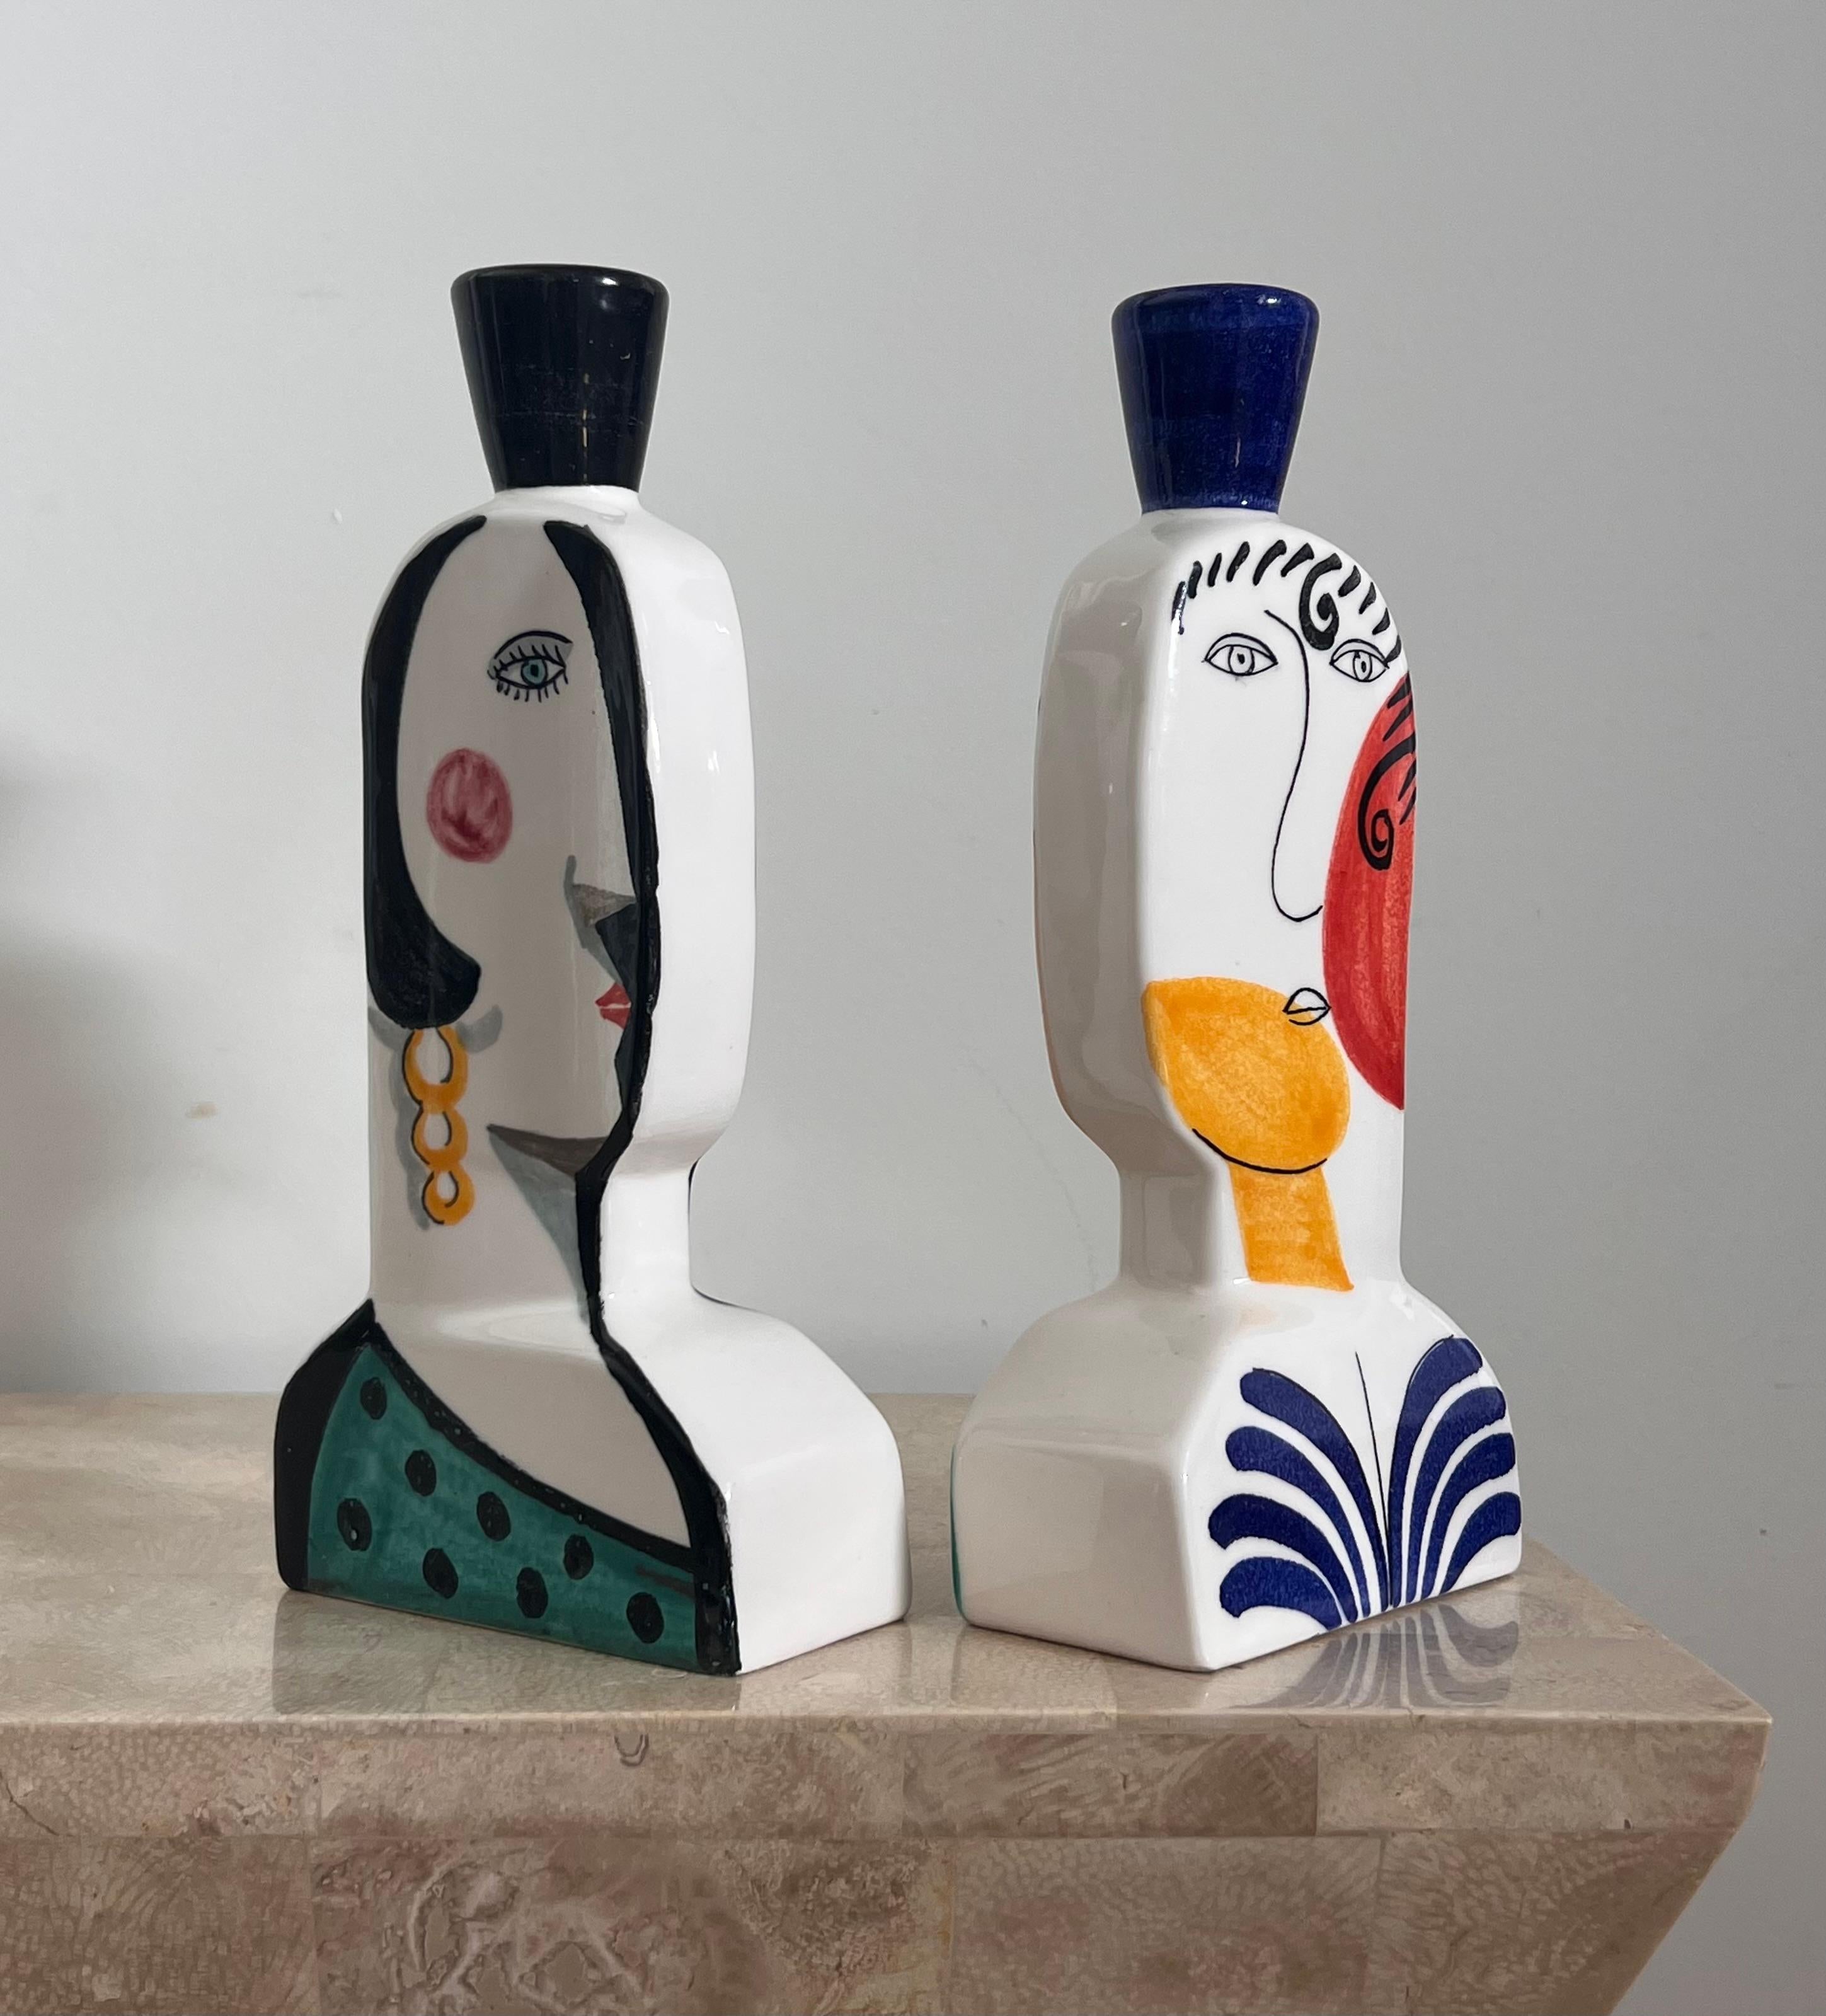 Hand-Painted Spanish Cubist figurative “Face” candlesticks, signed by artist, 20th century